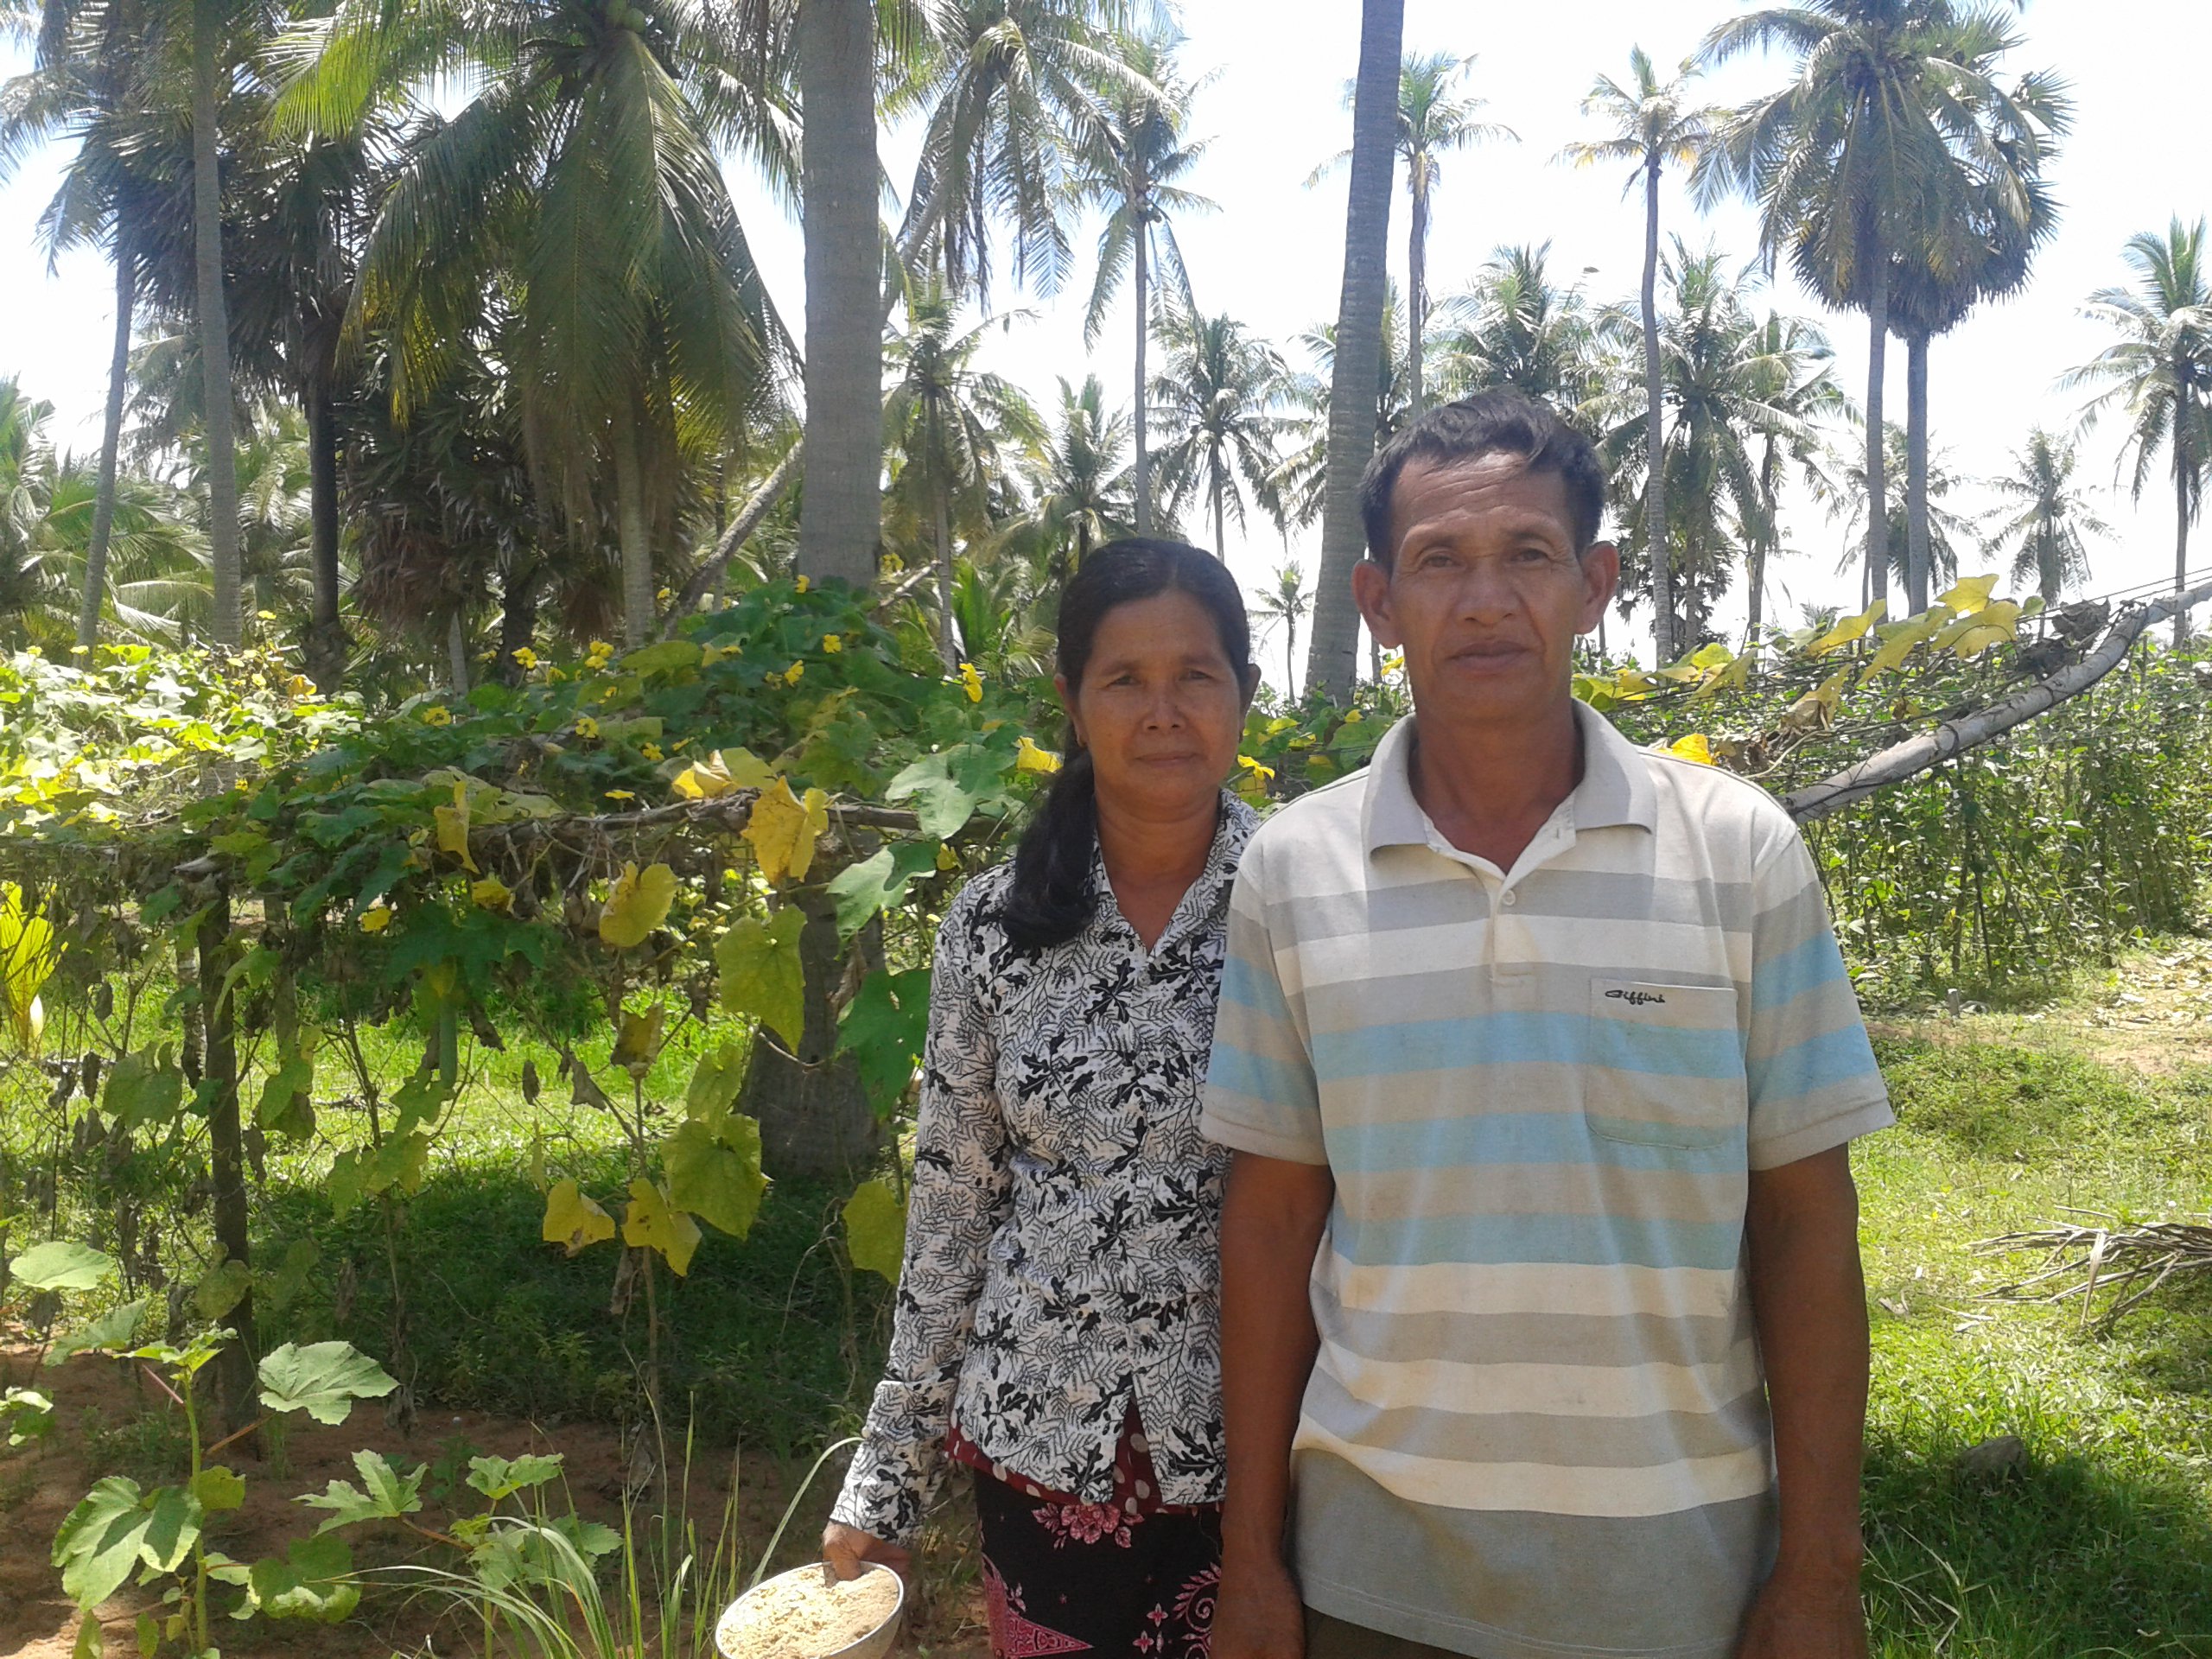 Wife and Husband in their vegetable garden, rural Cambodia, 2017. Photo: Sharada Keats